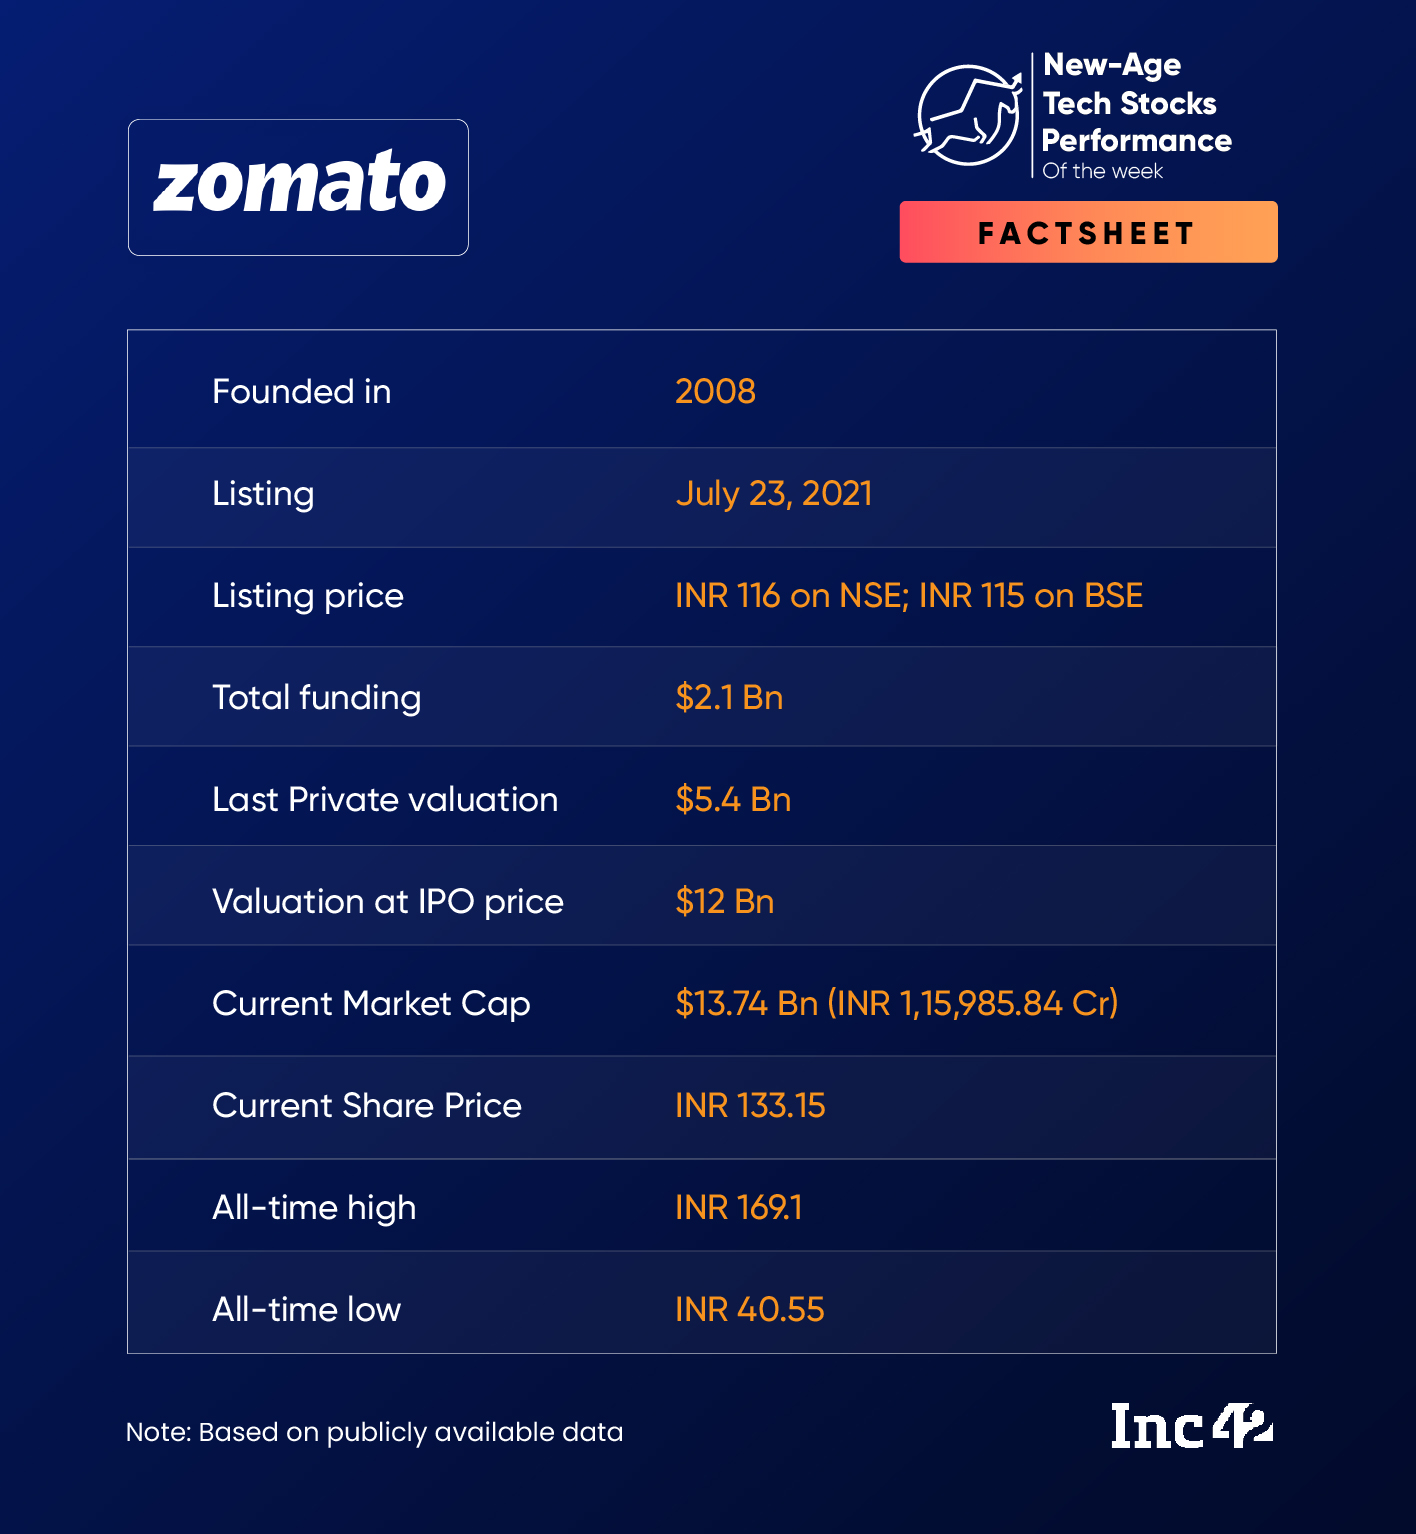 Zomato’s Sustains Bull Run Even As Tax Trouble Looms